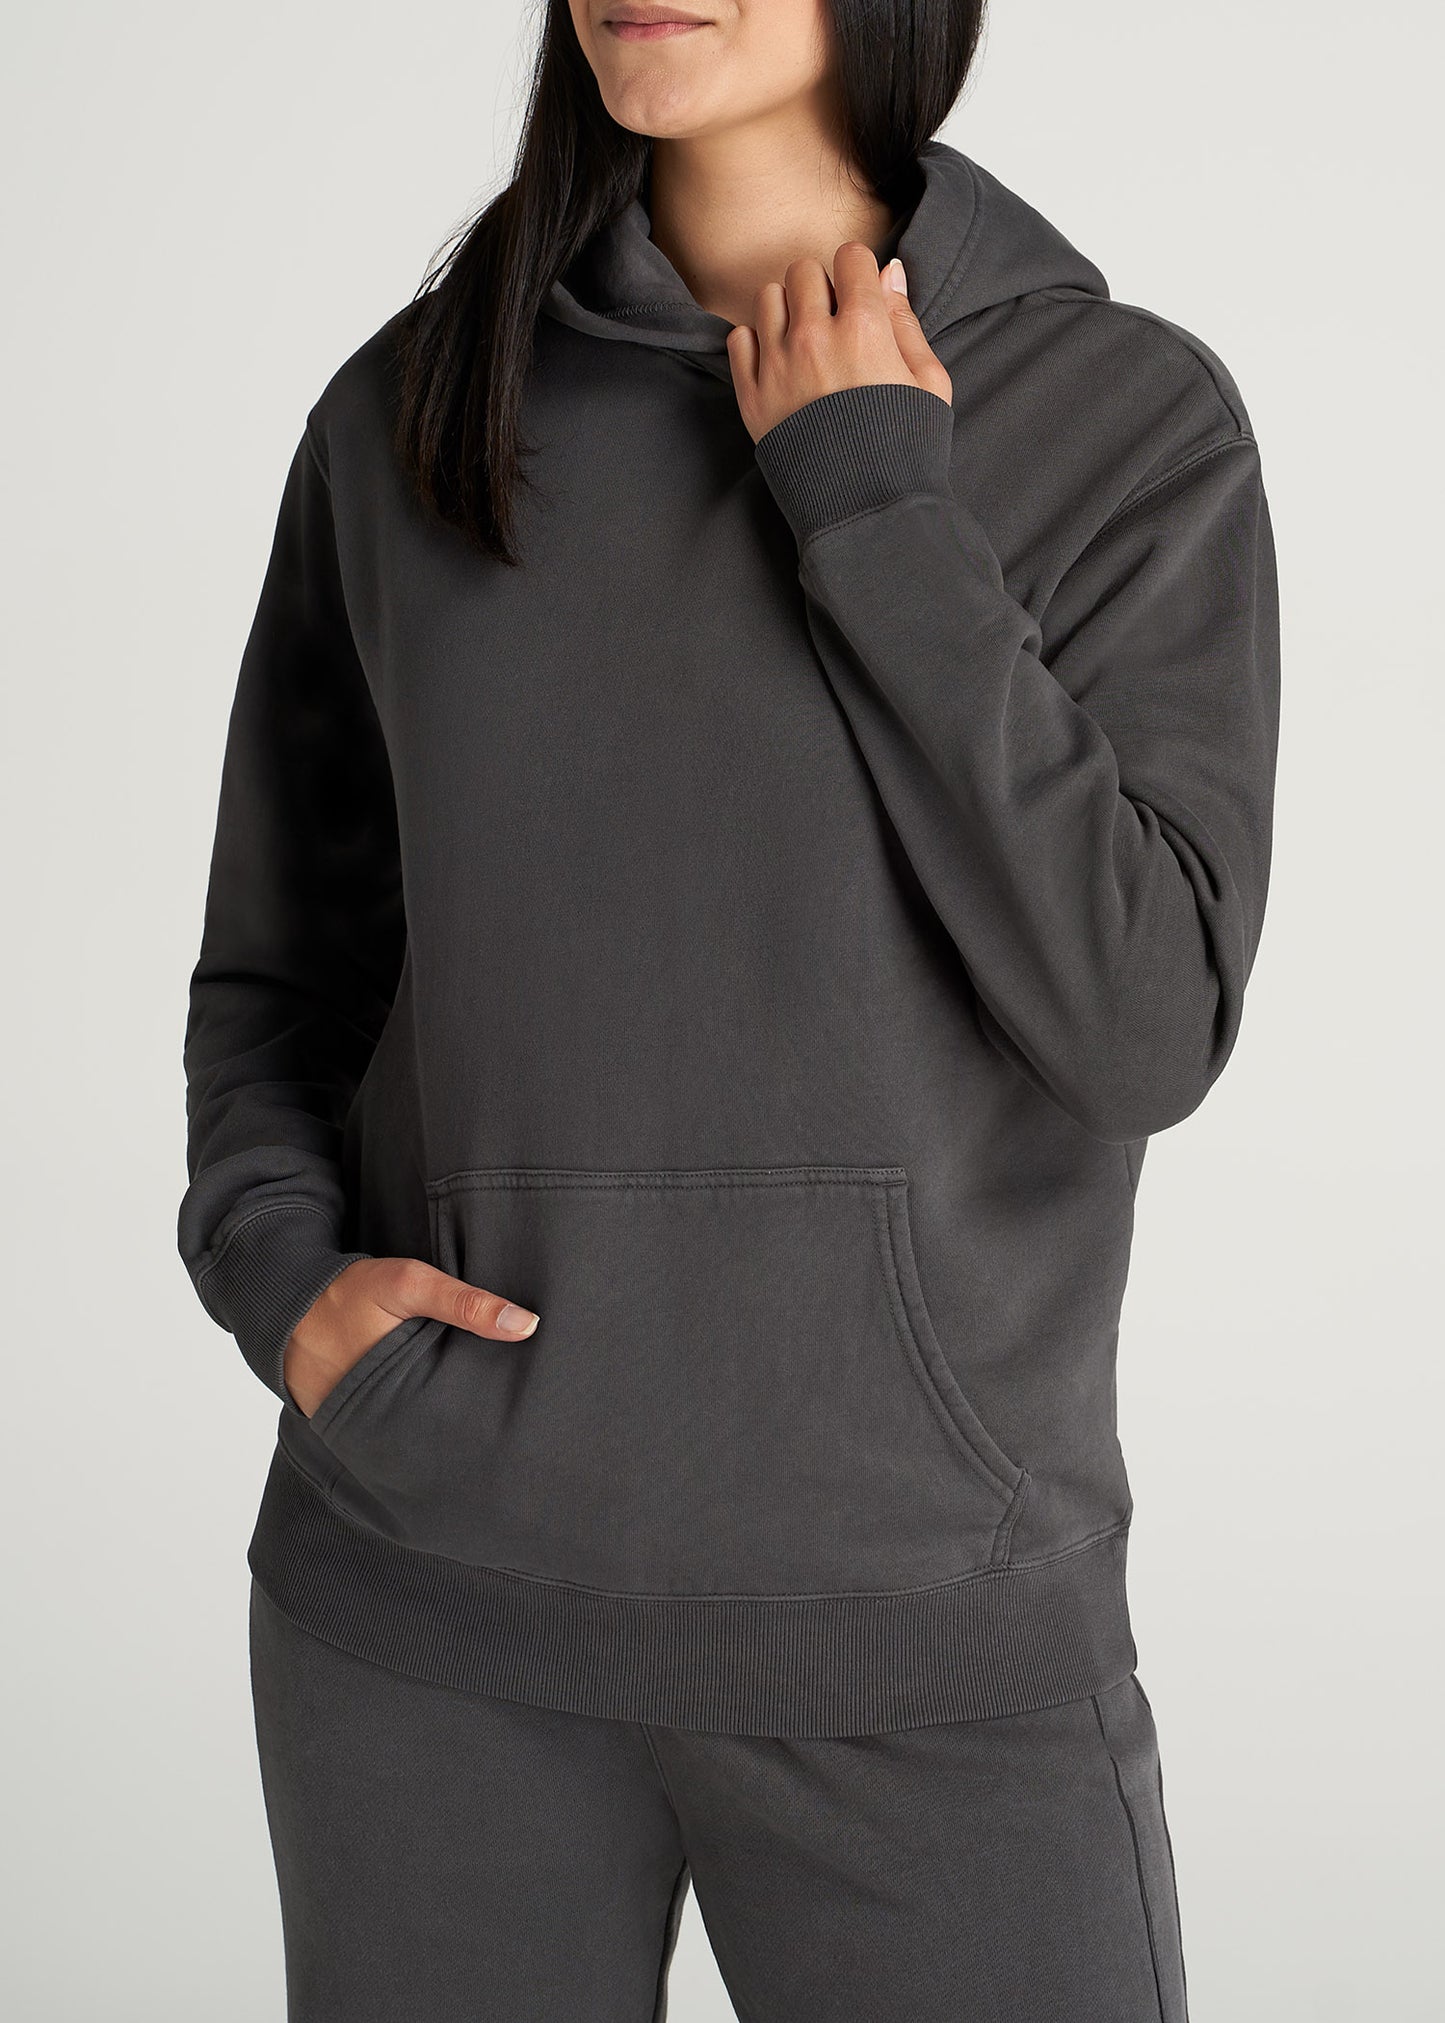 American-Tall-Women-Womens-8020-GD-WKND-Hoodie-Charcoal-front